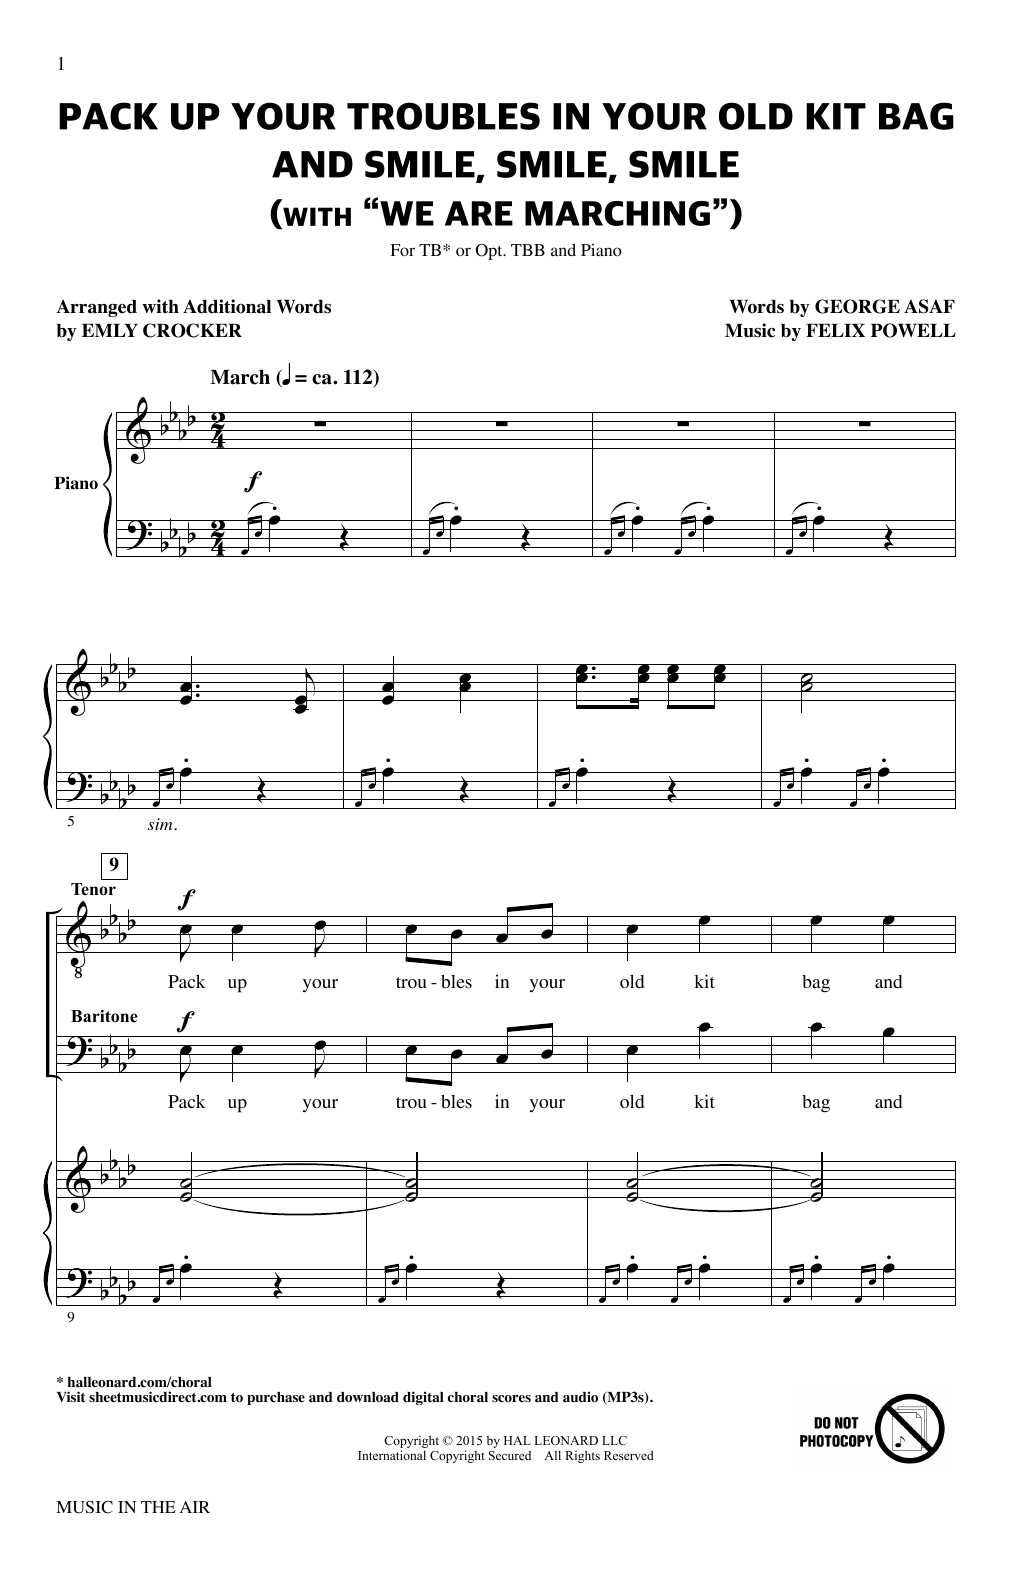 Felix Powell Pack Up Your Troubles In Your Old Kit Bag And Smile, Smile, Smile (from Music In The Air) sheet music notes and chords. Download Printable PDF.